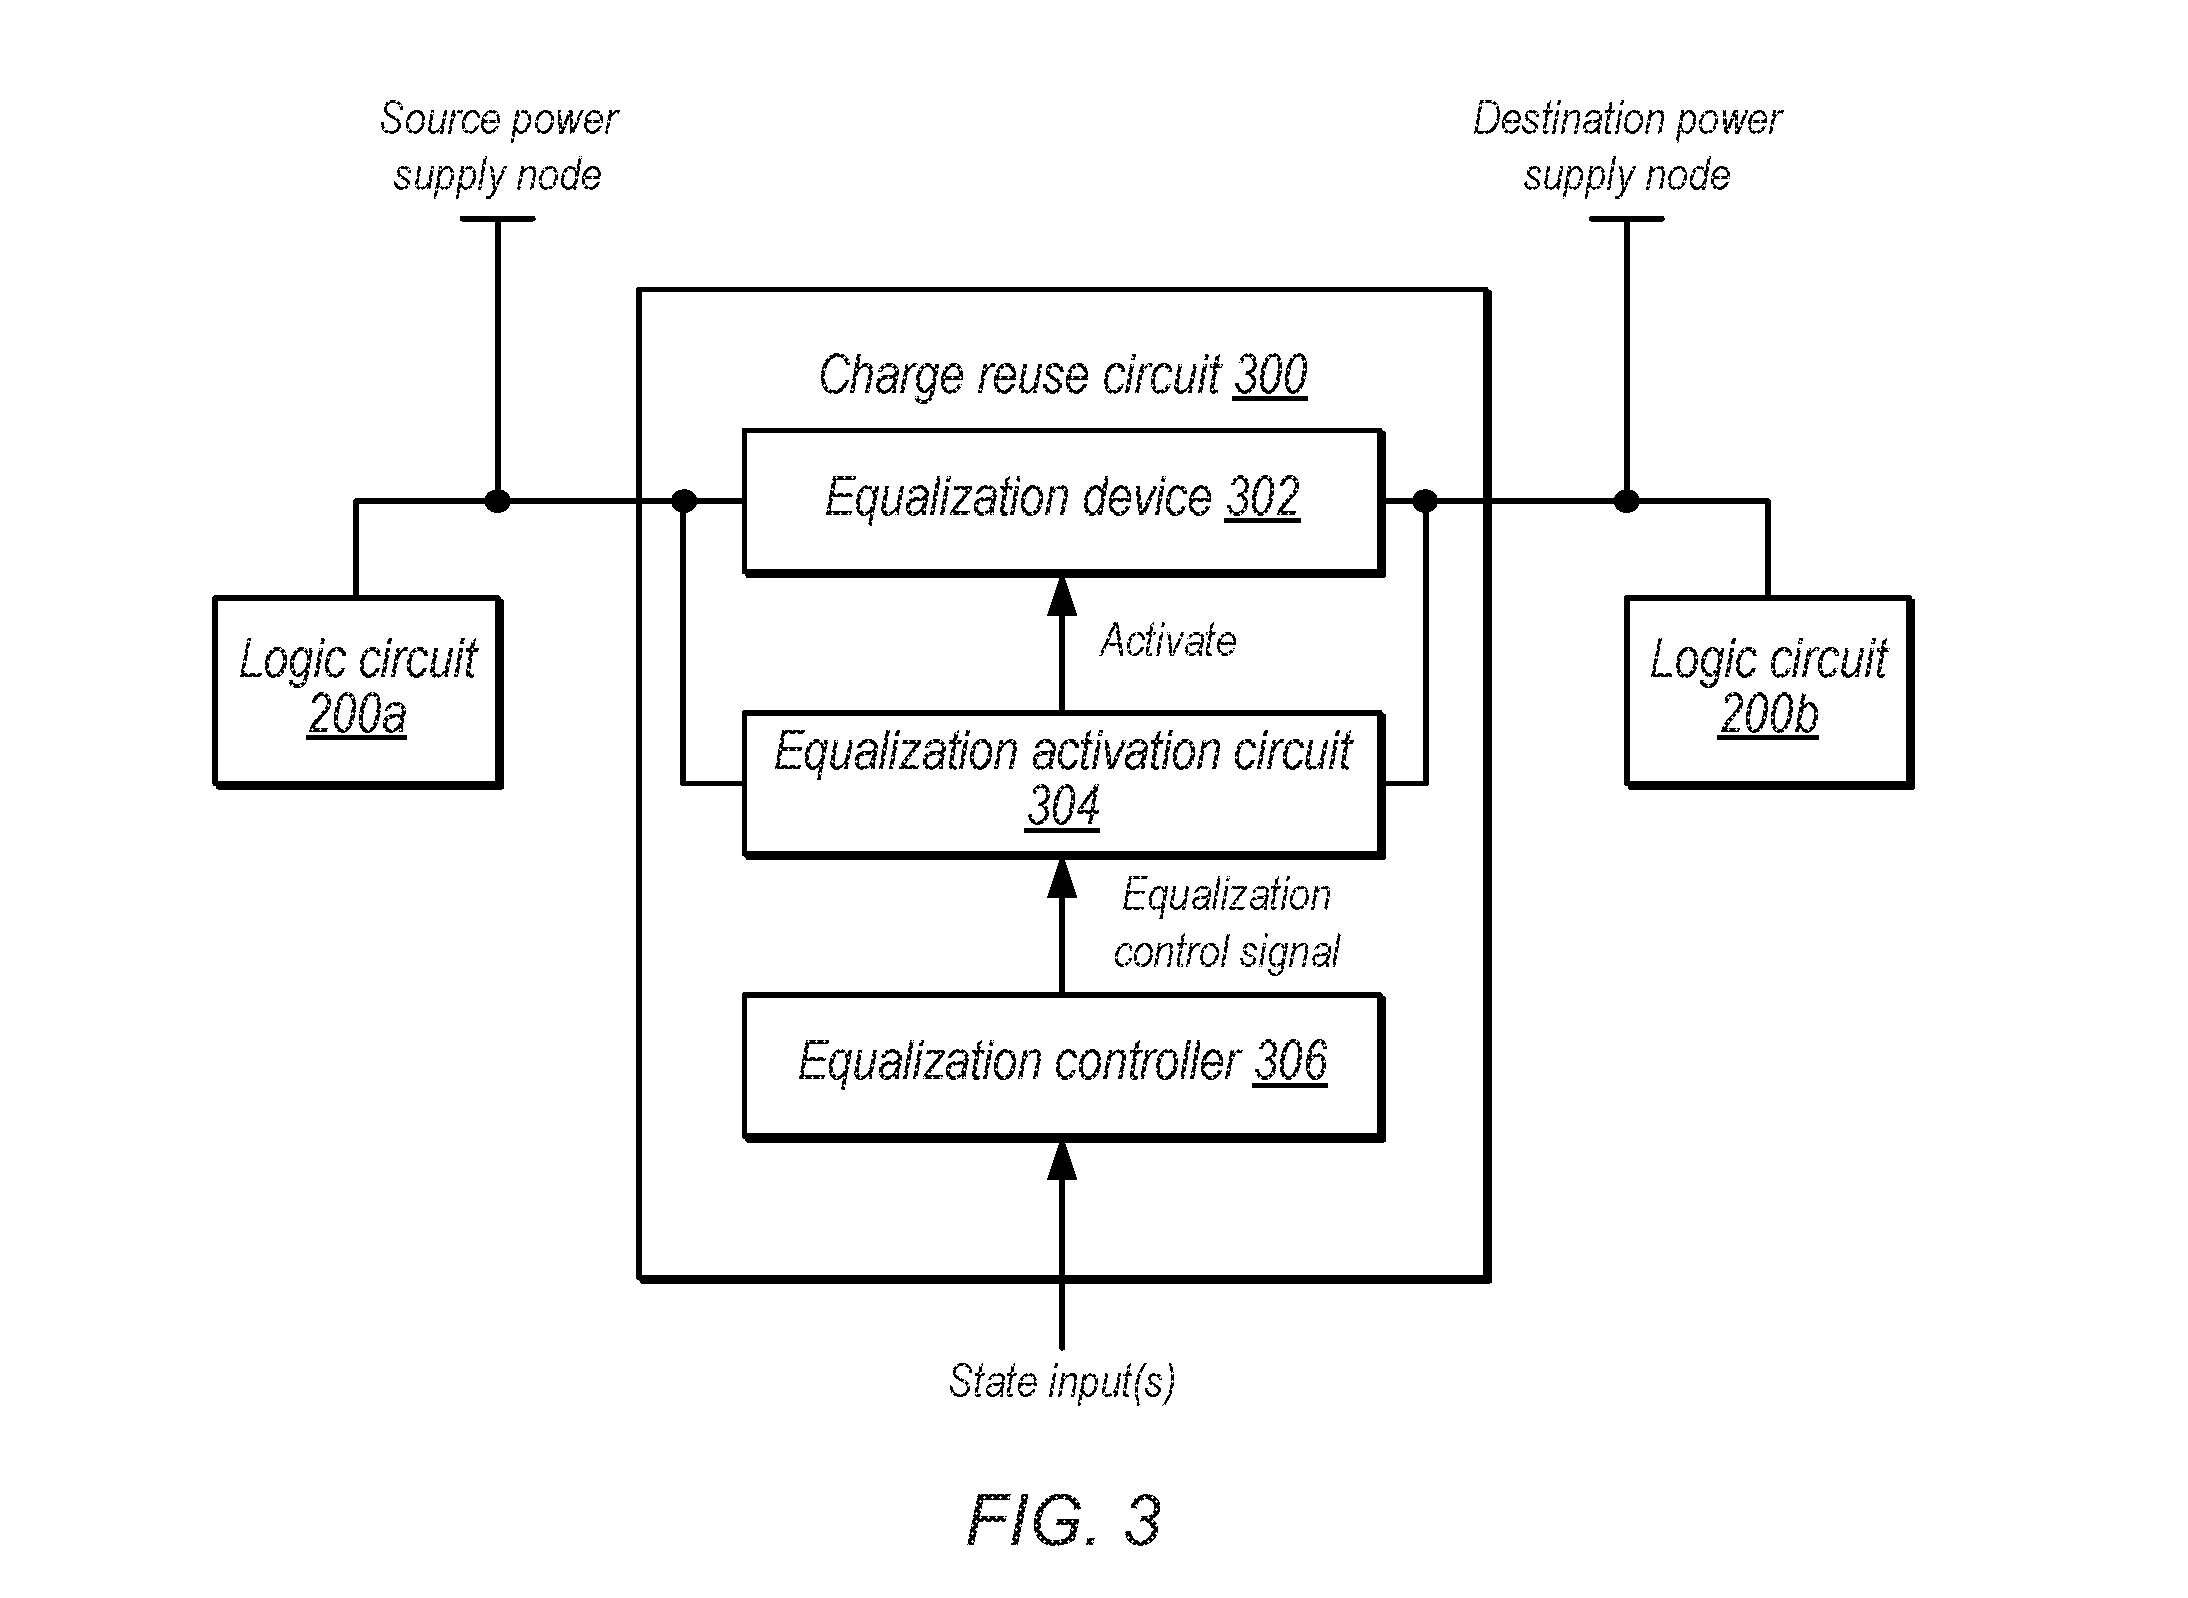 Integrated circuit power reduction through charge